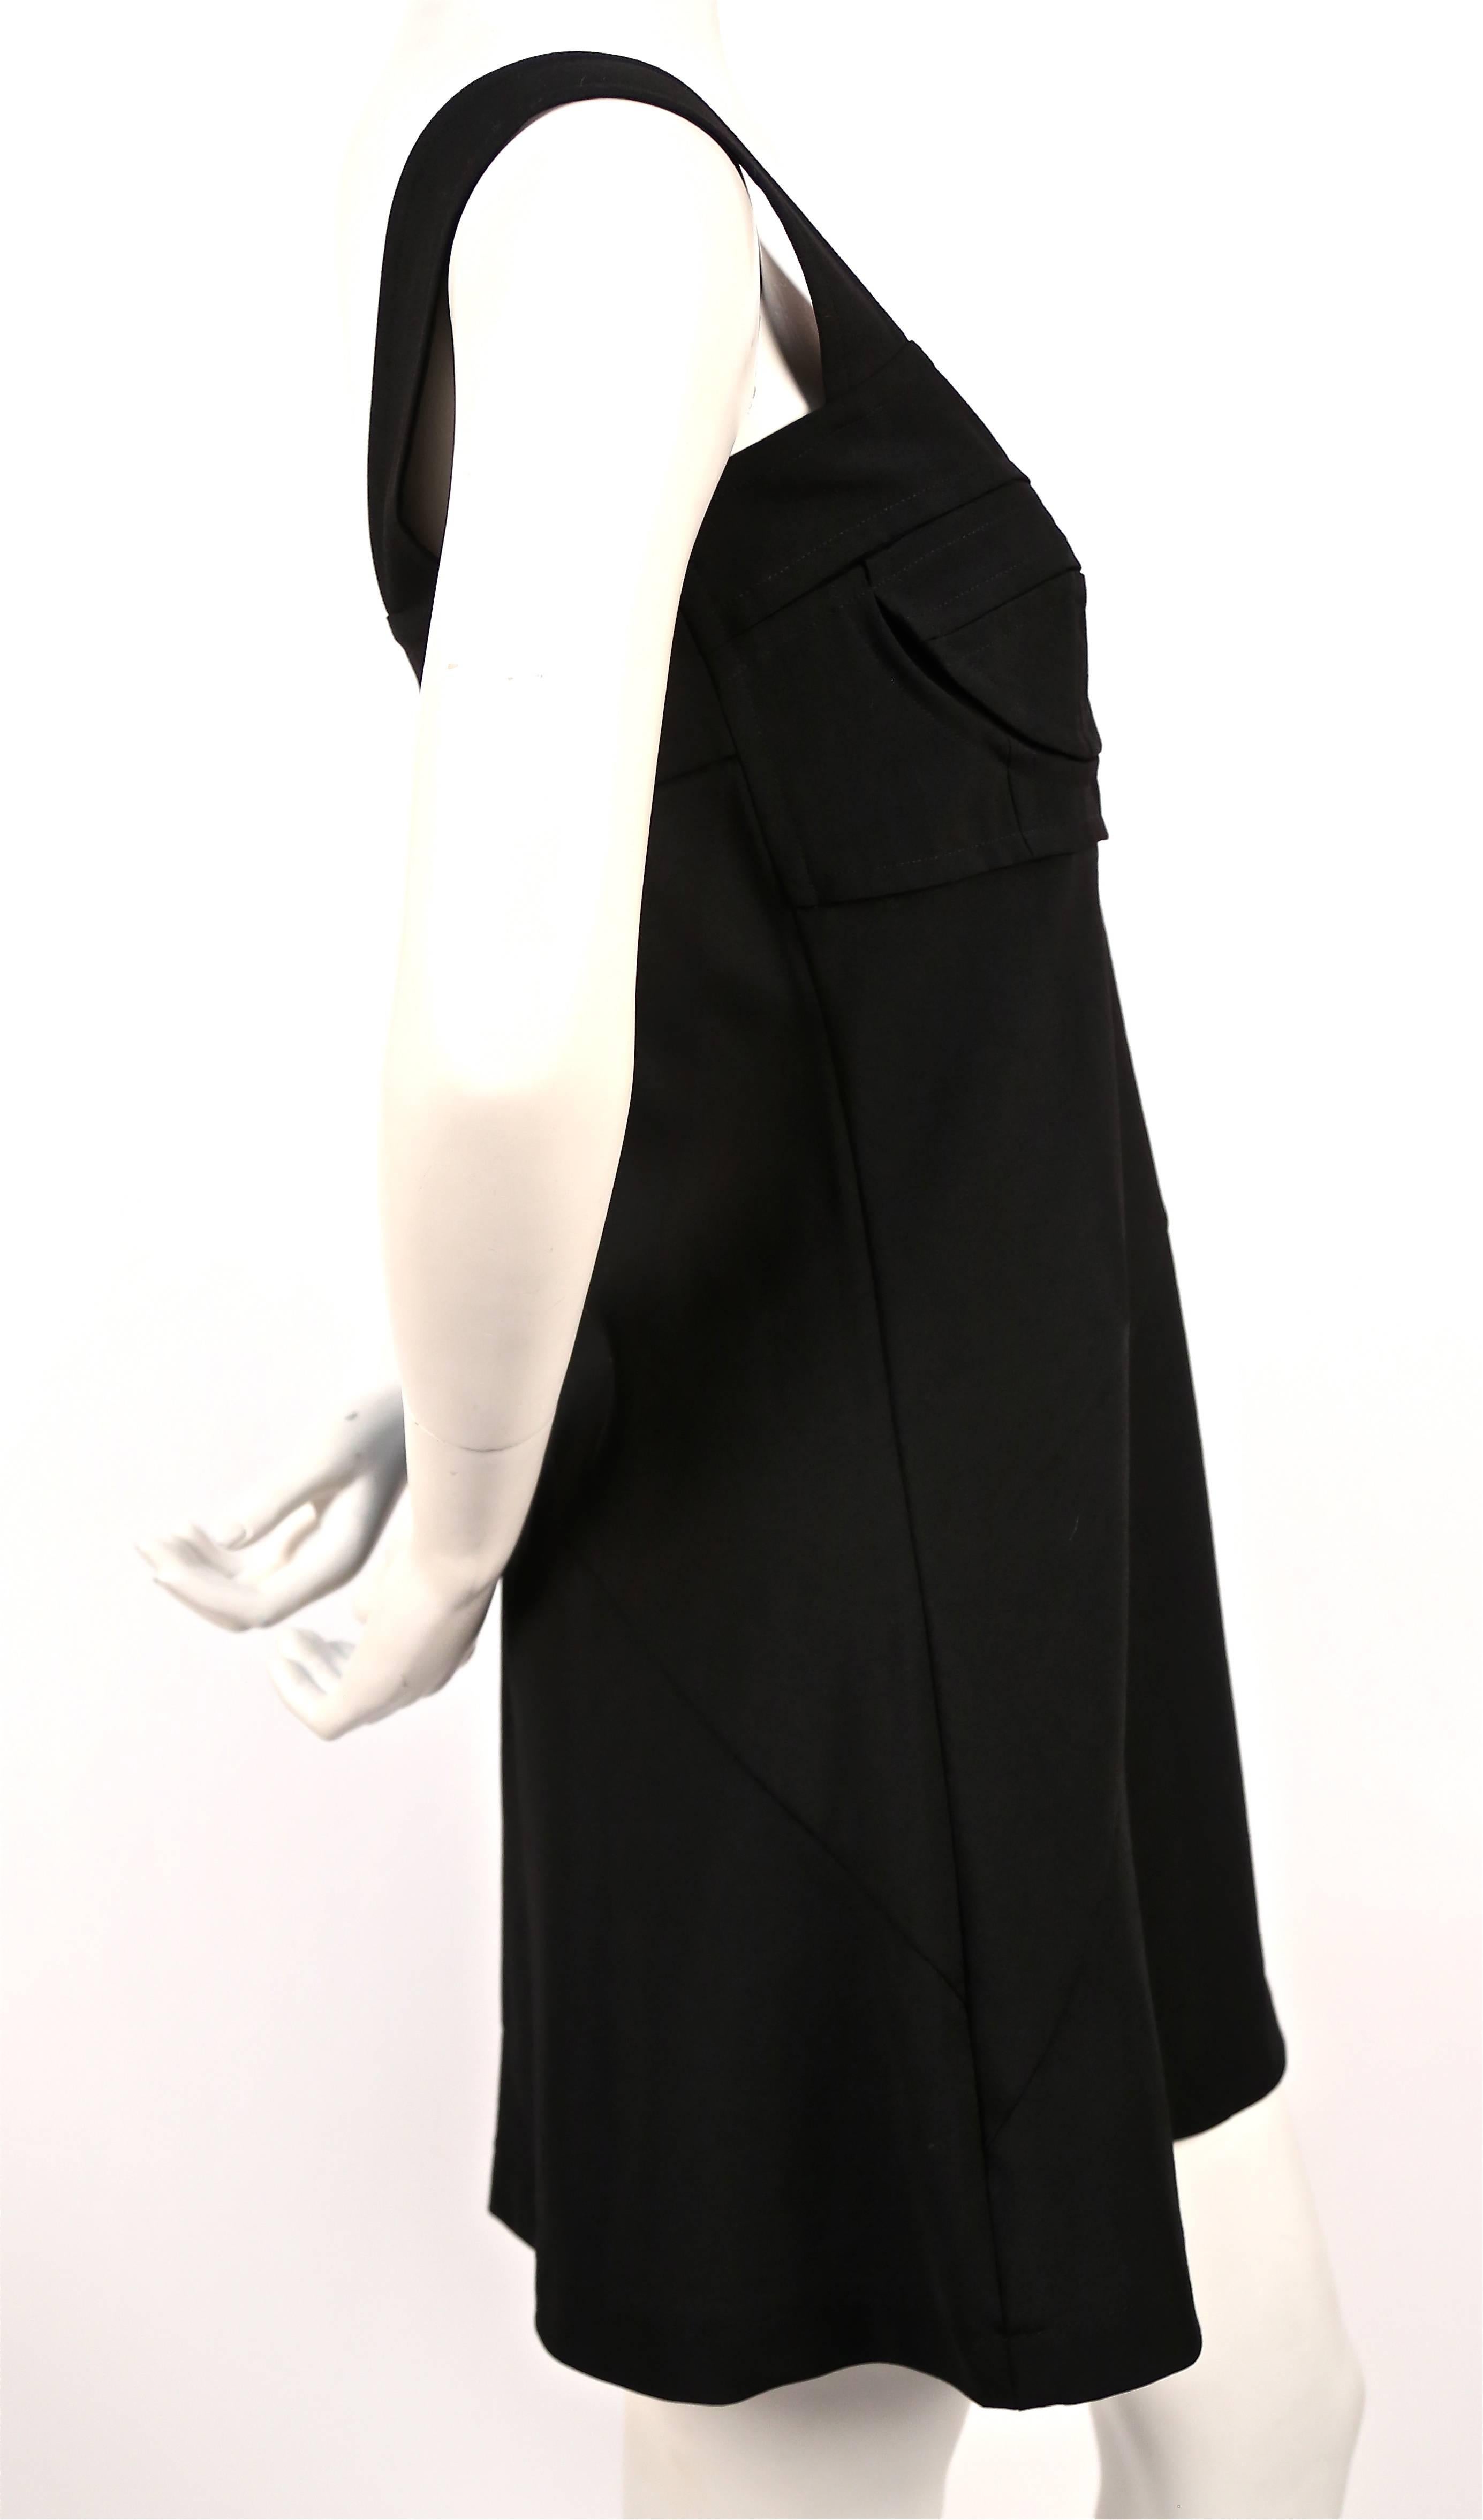 Jet black seamed bustier style mini dress from Comme des Garcons dating to 2001. Measures approximately 34